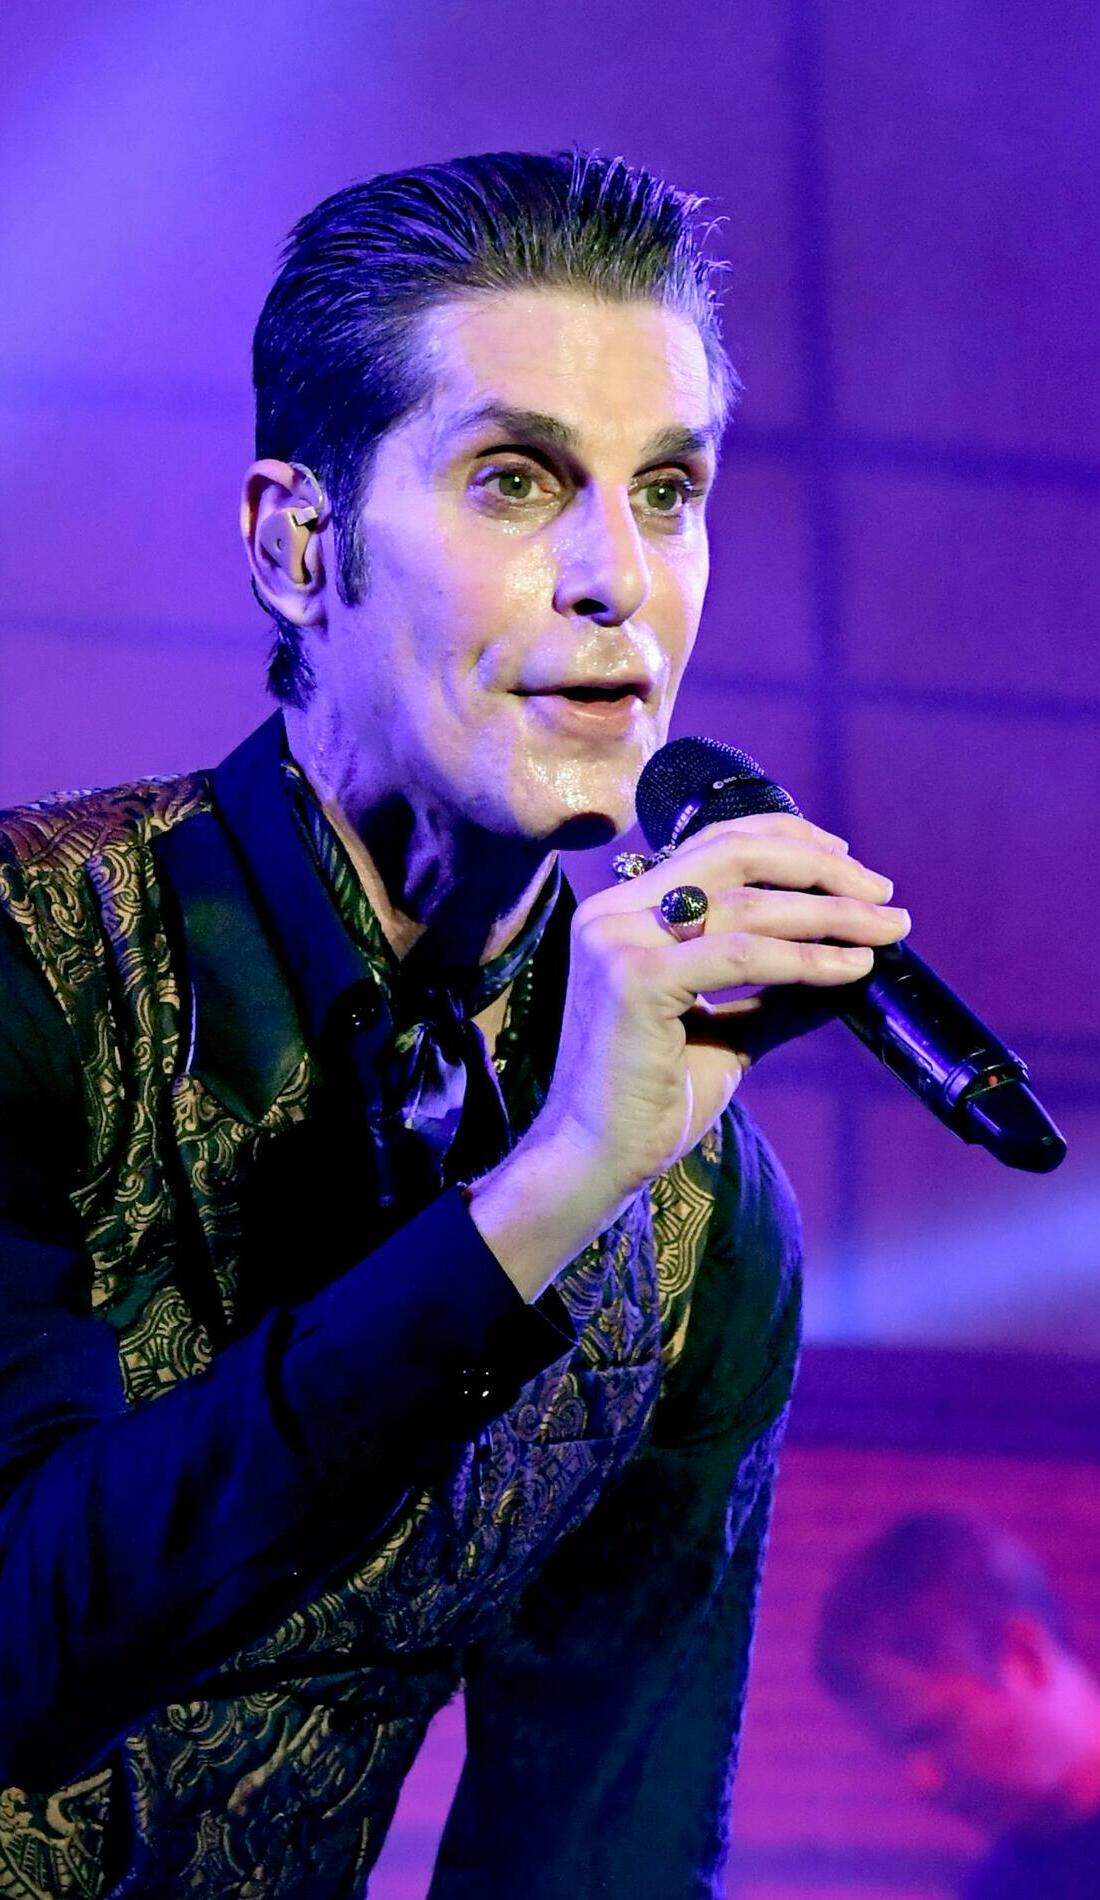 A Perry Farrell live event